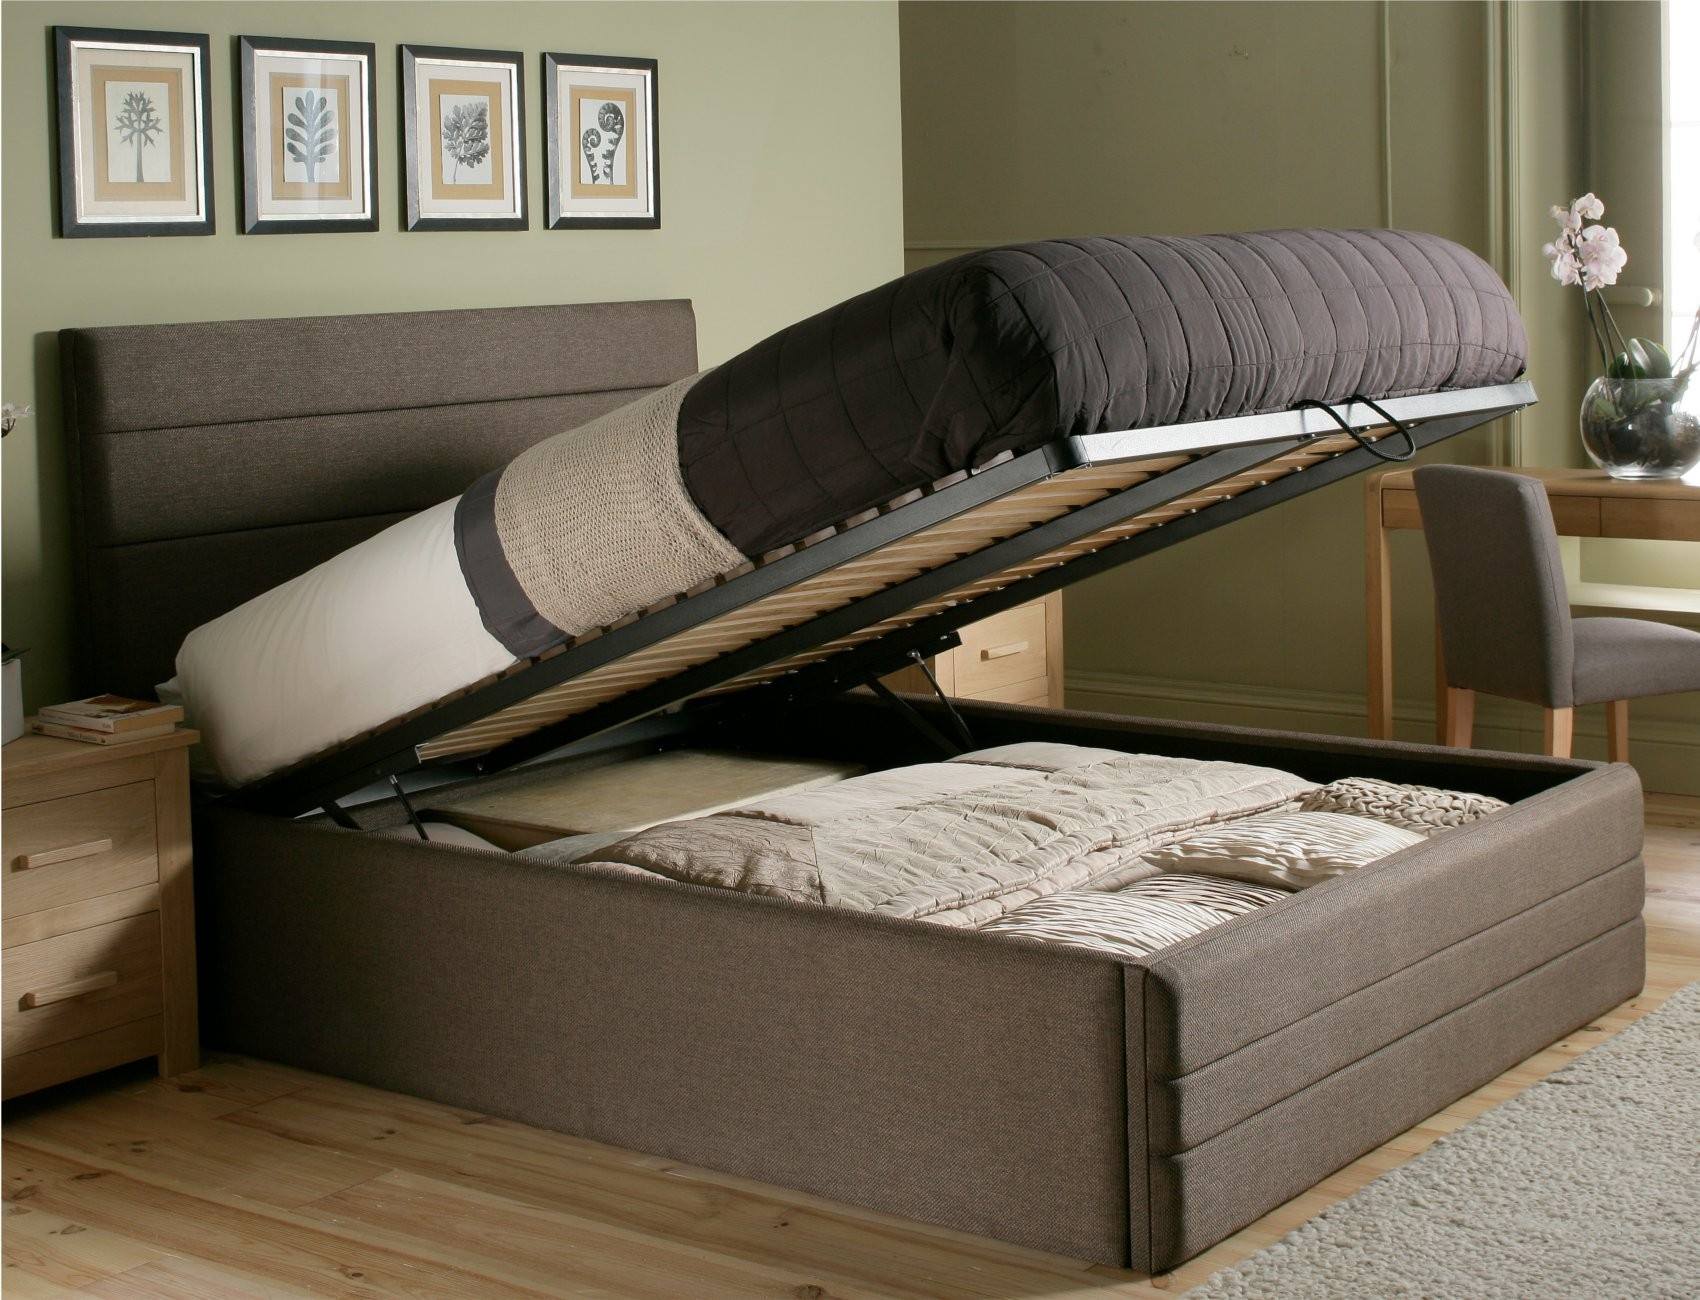 Maximize Storage Under the Bed